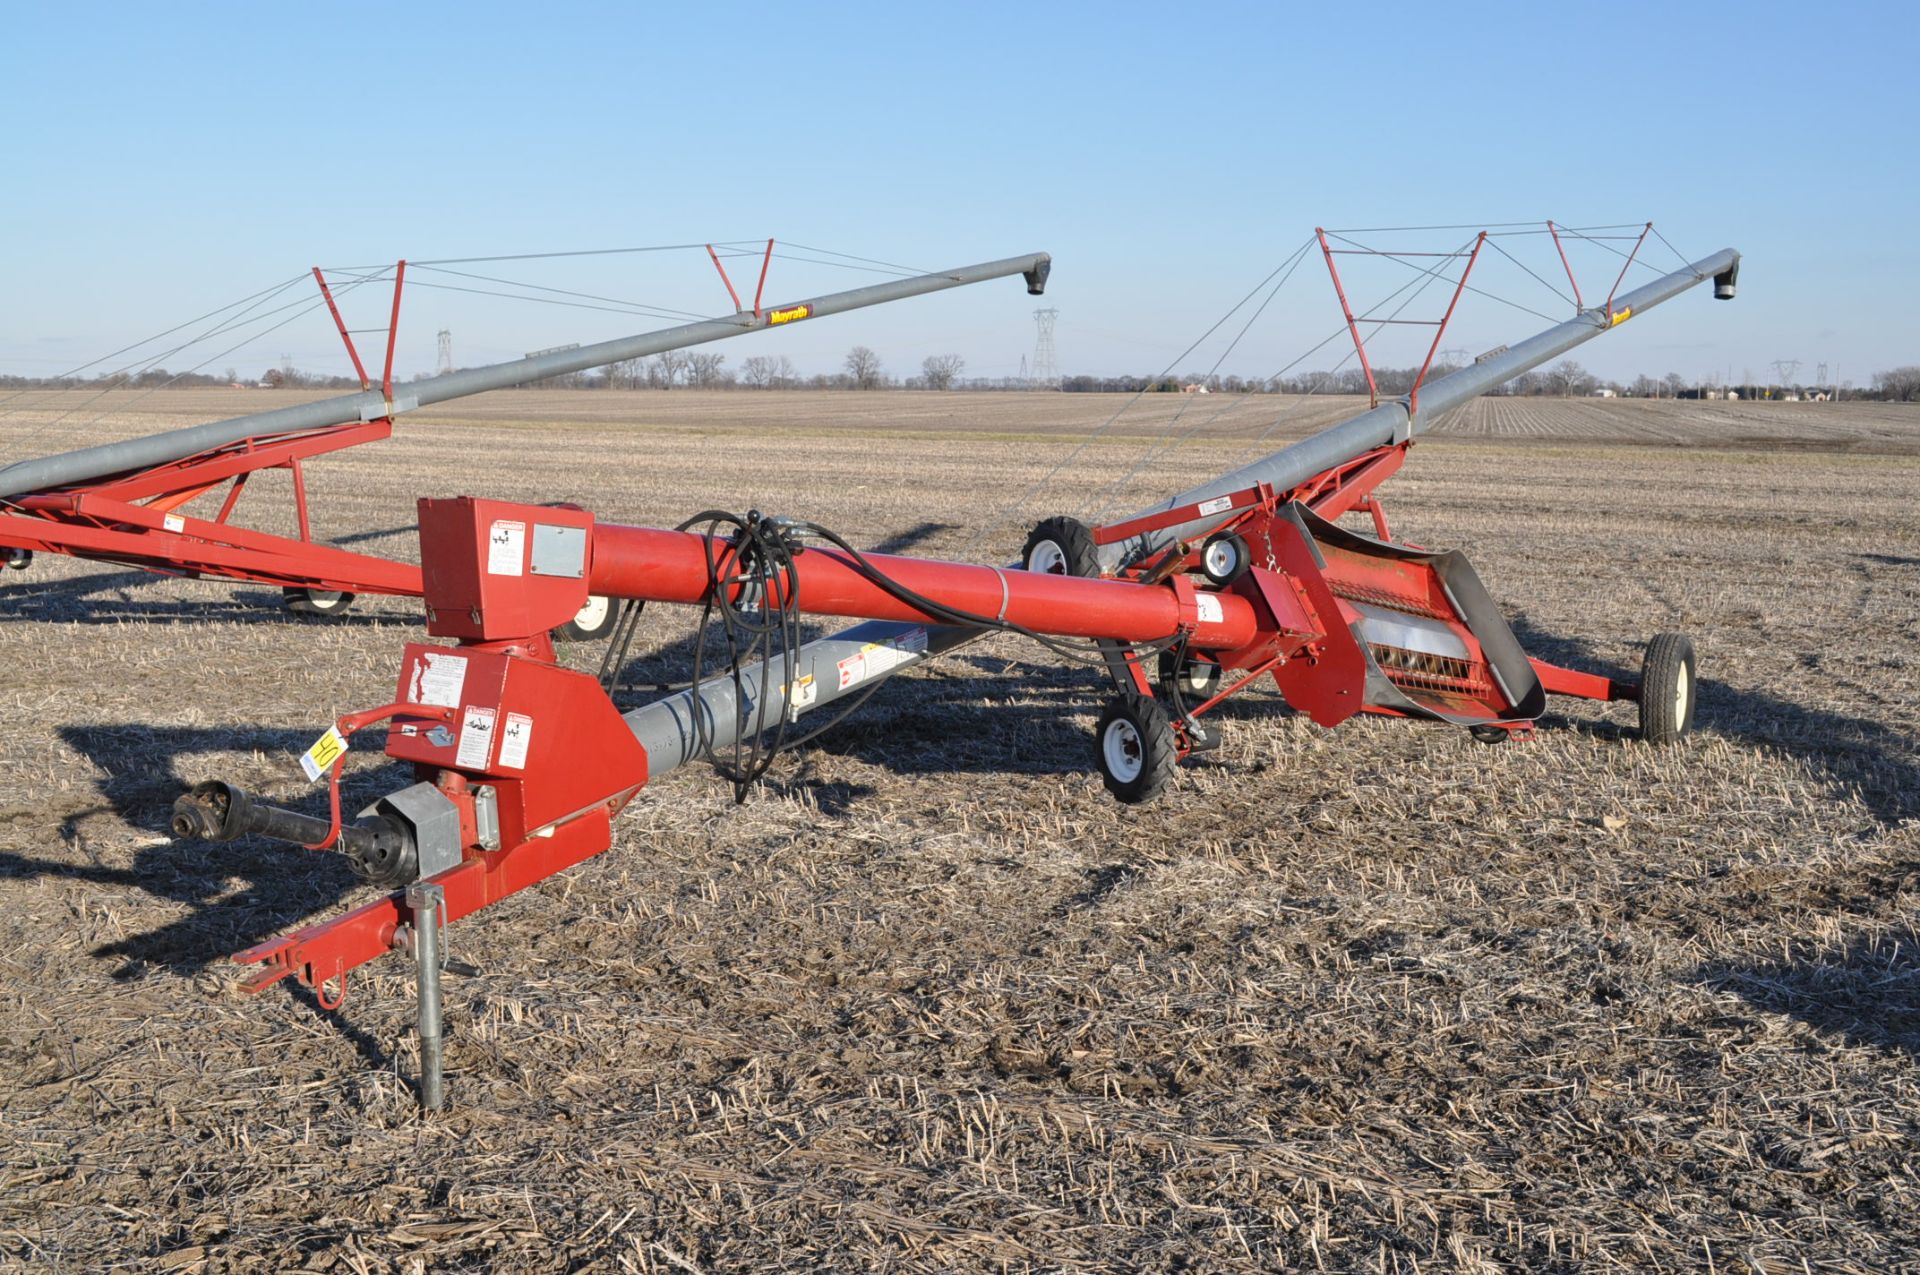 8” x 61’ Mayrath swing-a-way auger, hyd auger mover